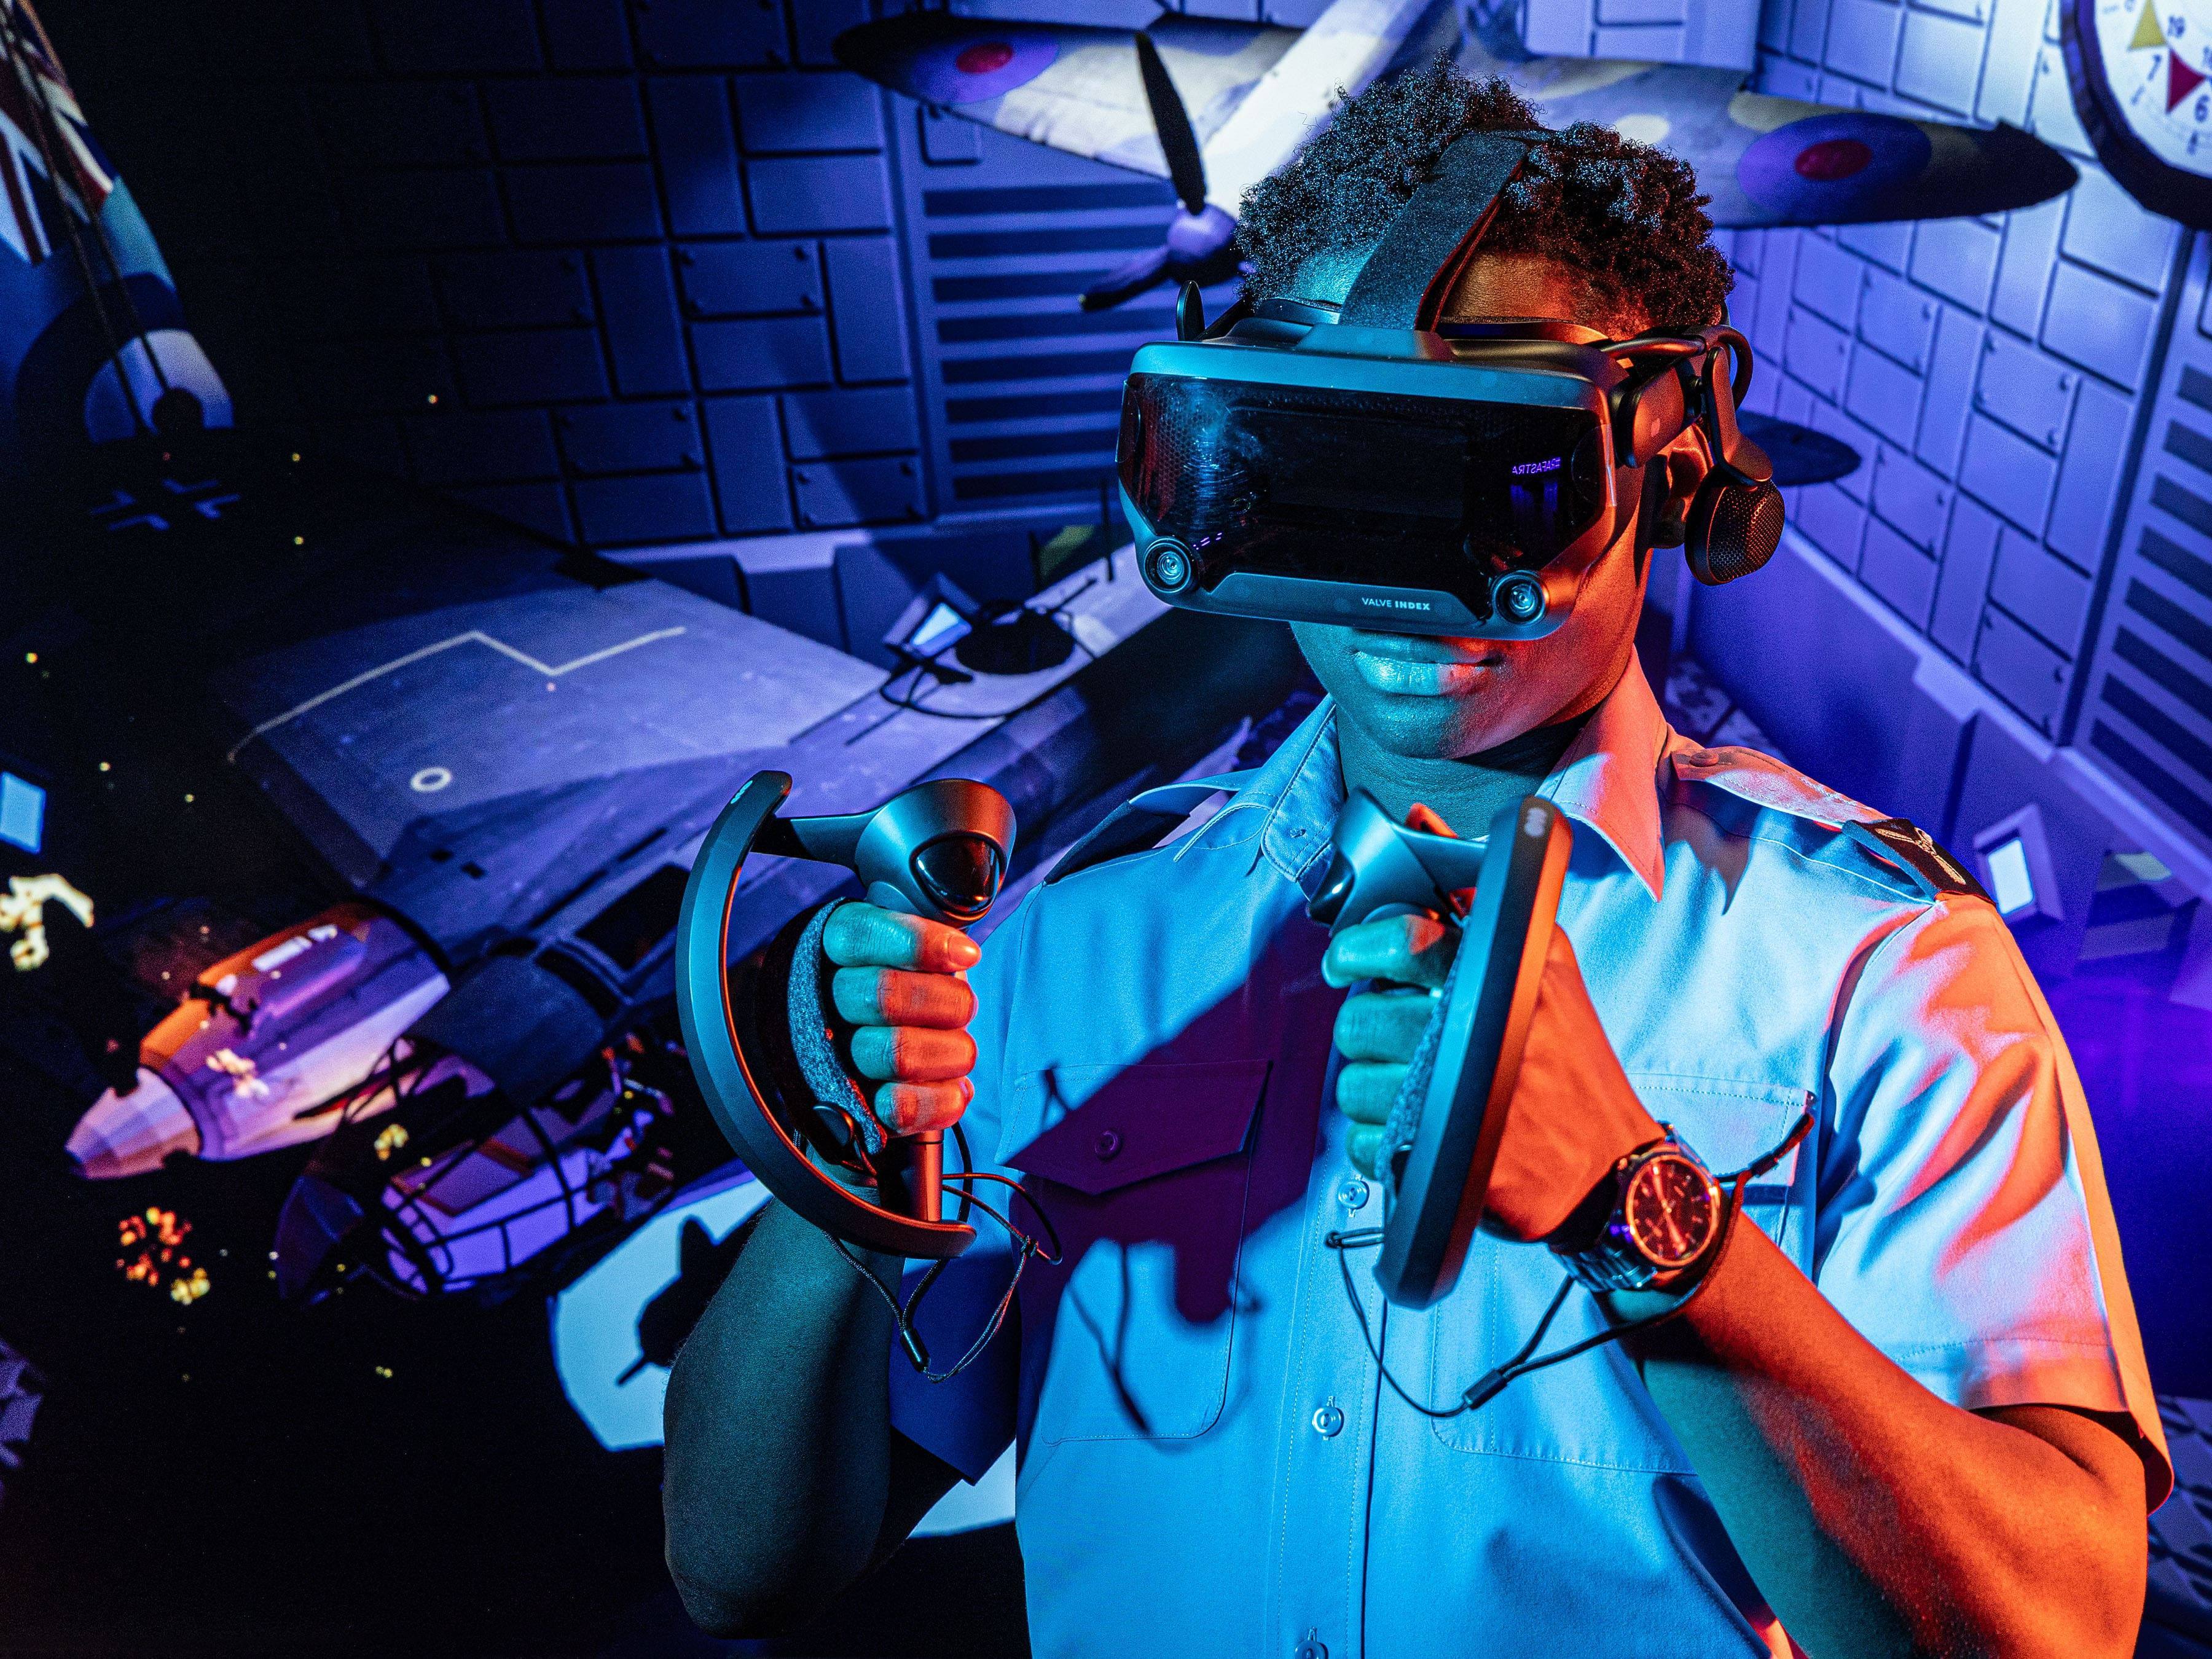 RAF personnel using virtual reality headset against a blue background of space and aircraft